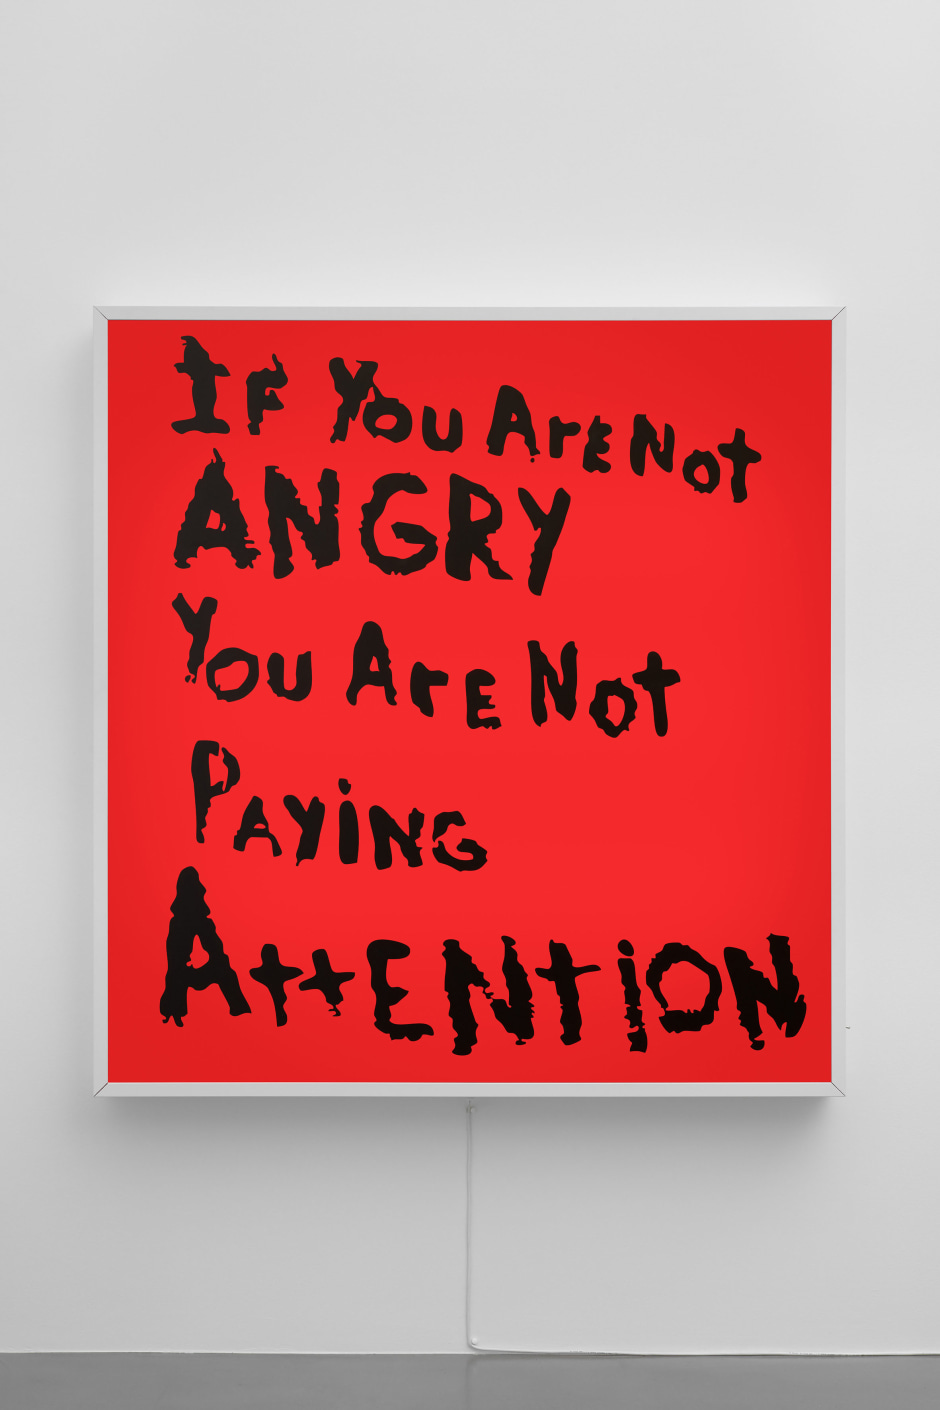 If You Are Not Angry You Are Not Paying Attention, 2017  light box  176.0 x 166.0 x 15.0 cm 69 1/4 x 65 1/4 x 5 7/8 in.